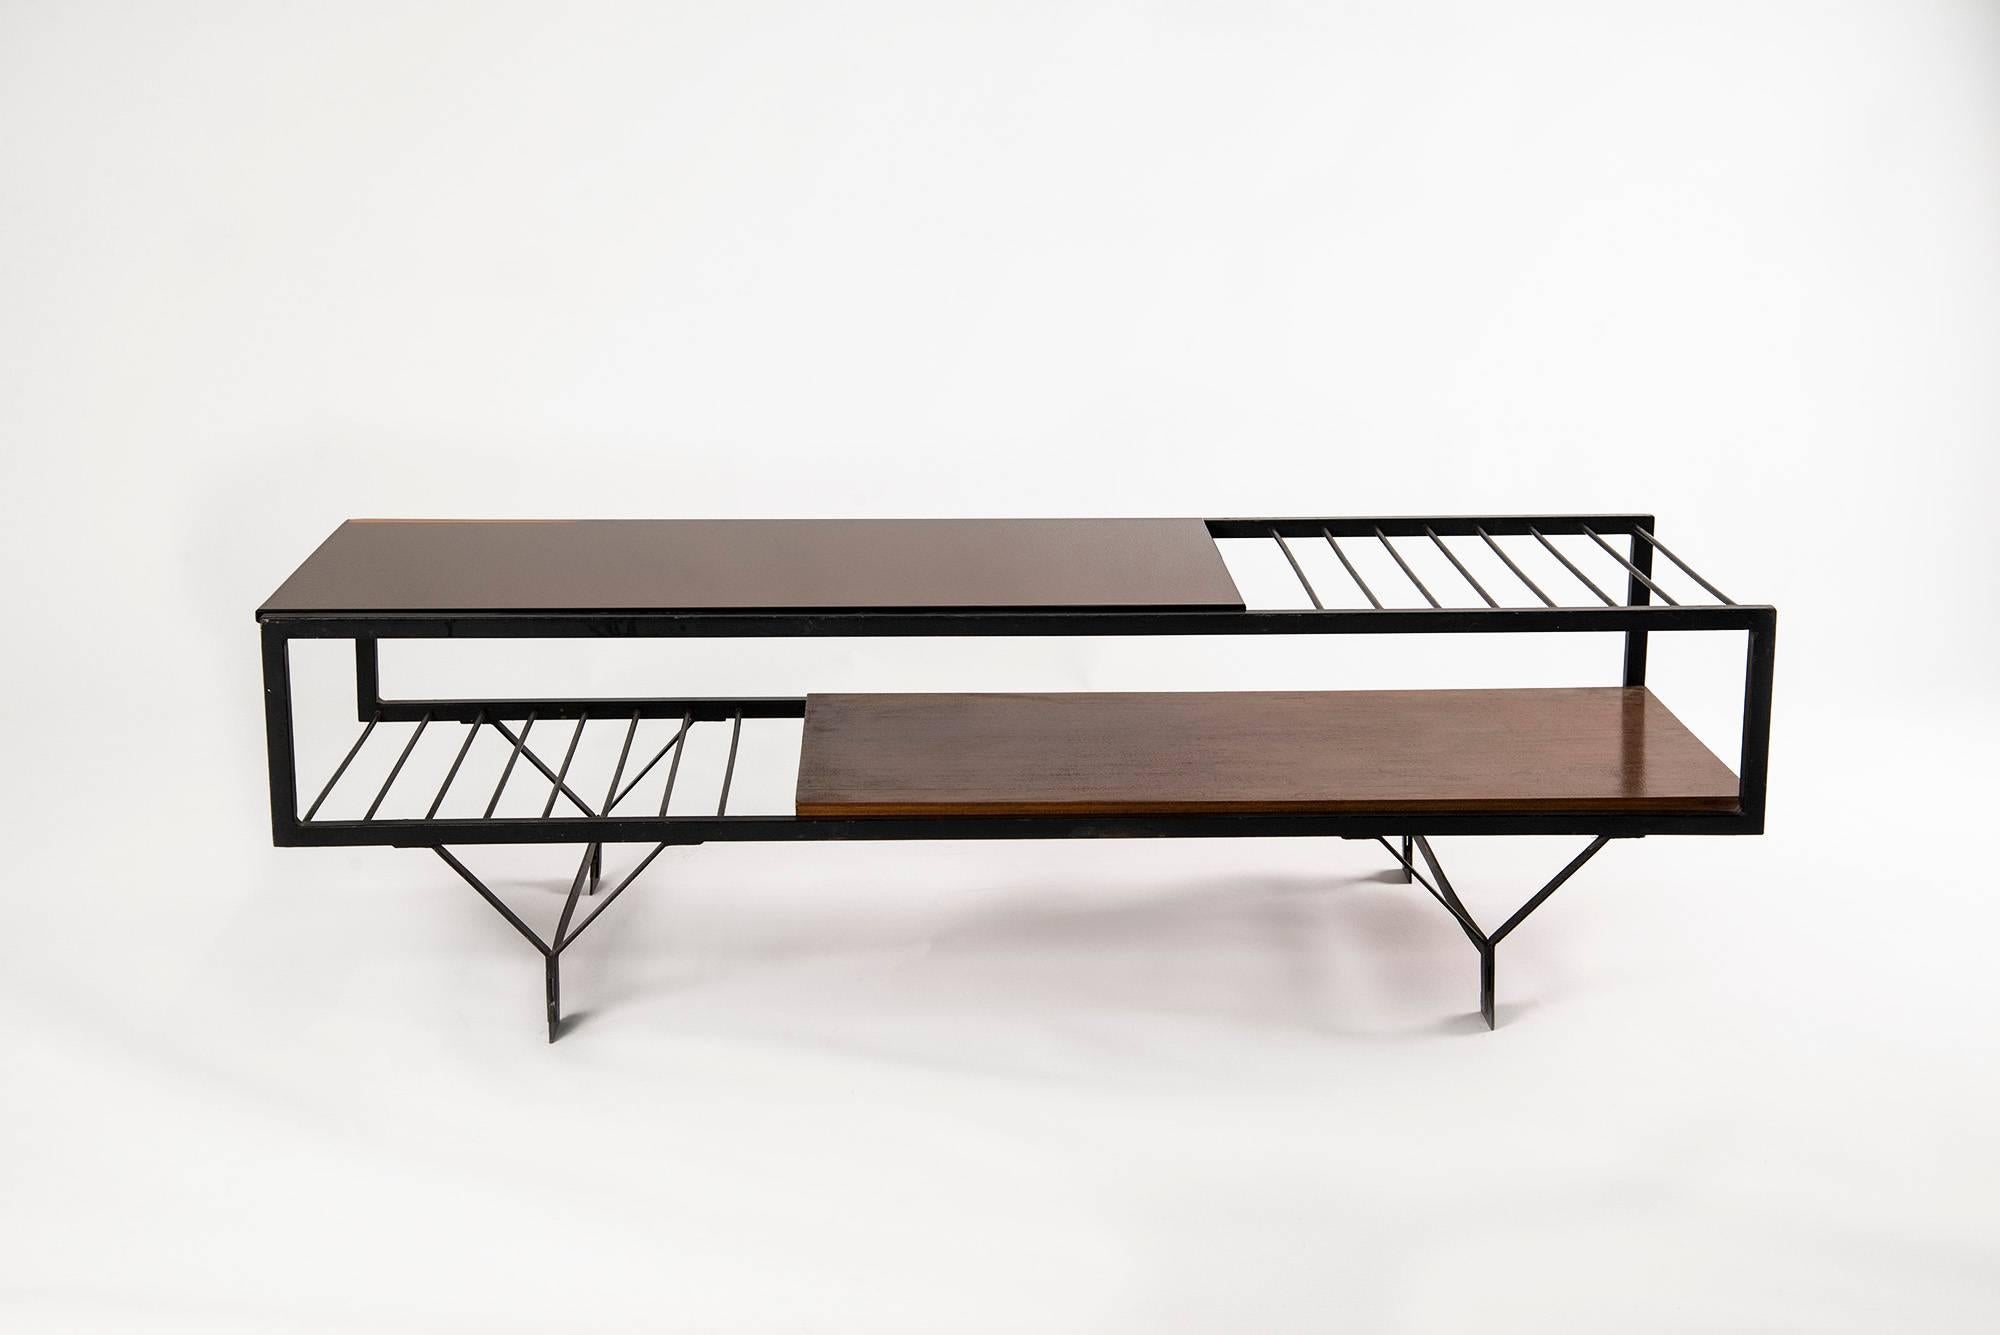 Large low table manufactured in Italy in the late 1950s. Black lacquered iron structure, wooden lower tray, mirrored orange glass top. Good original conditions.